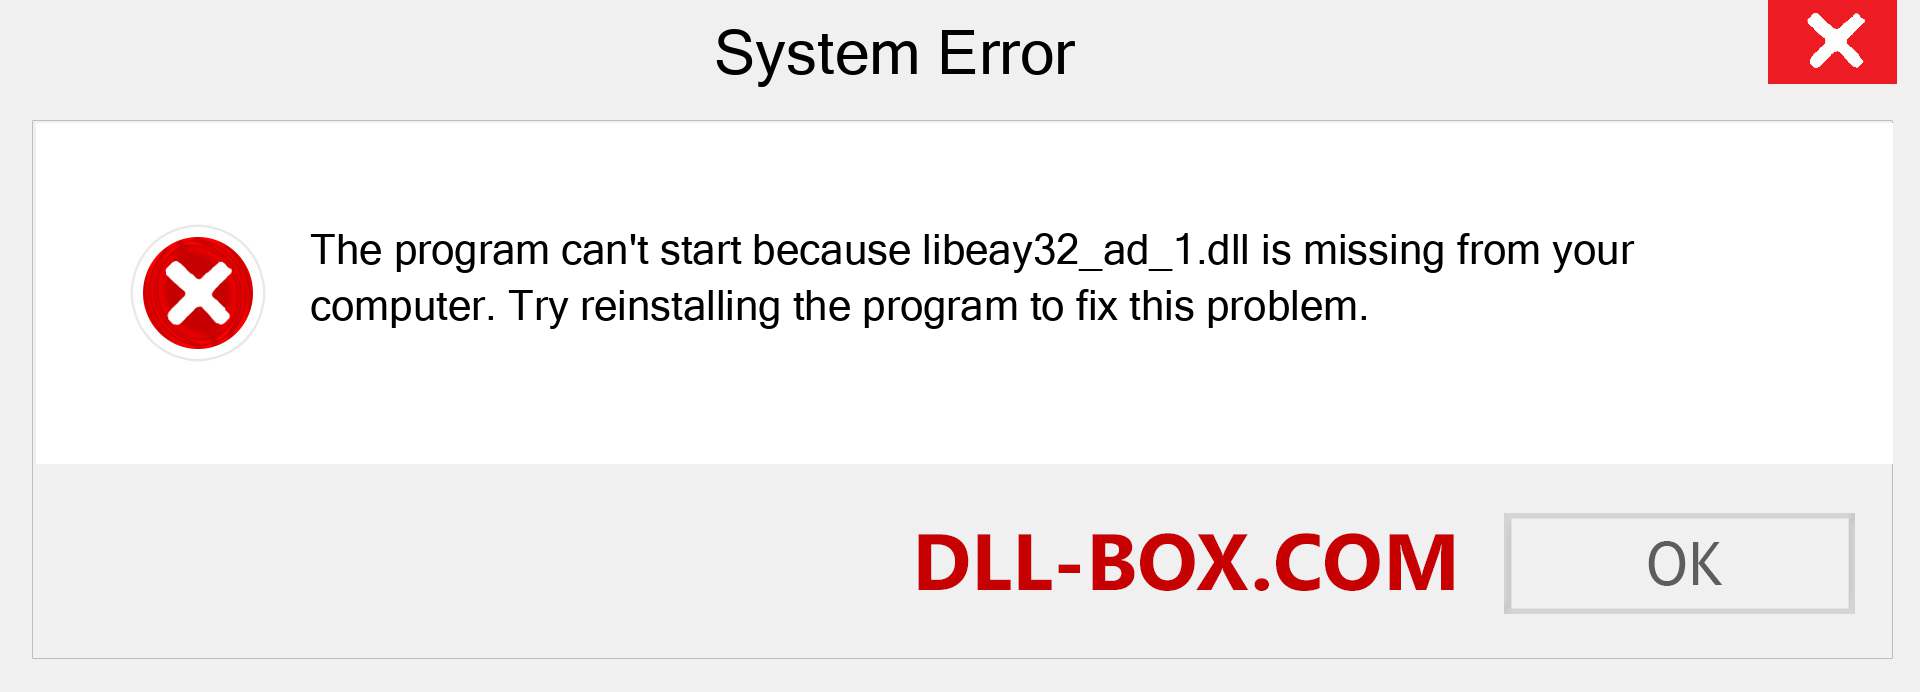  libeay32_ad_1.dll file is missing?. Download for Windows 7, 8, 10 - Fix  libeay32_ad_1 dll Missing Error on Windows, photos, images